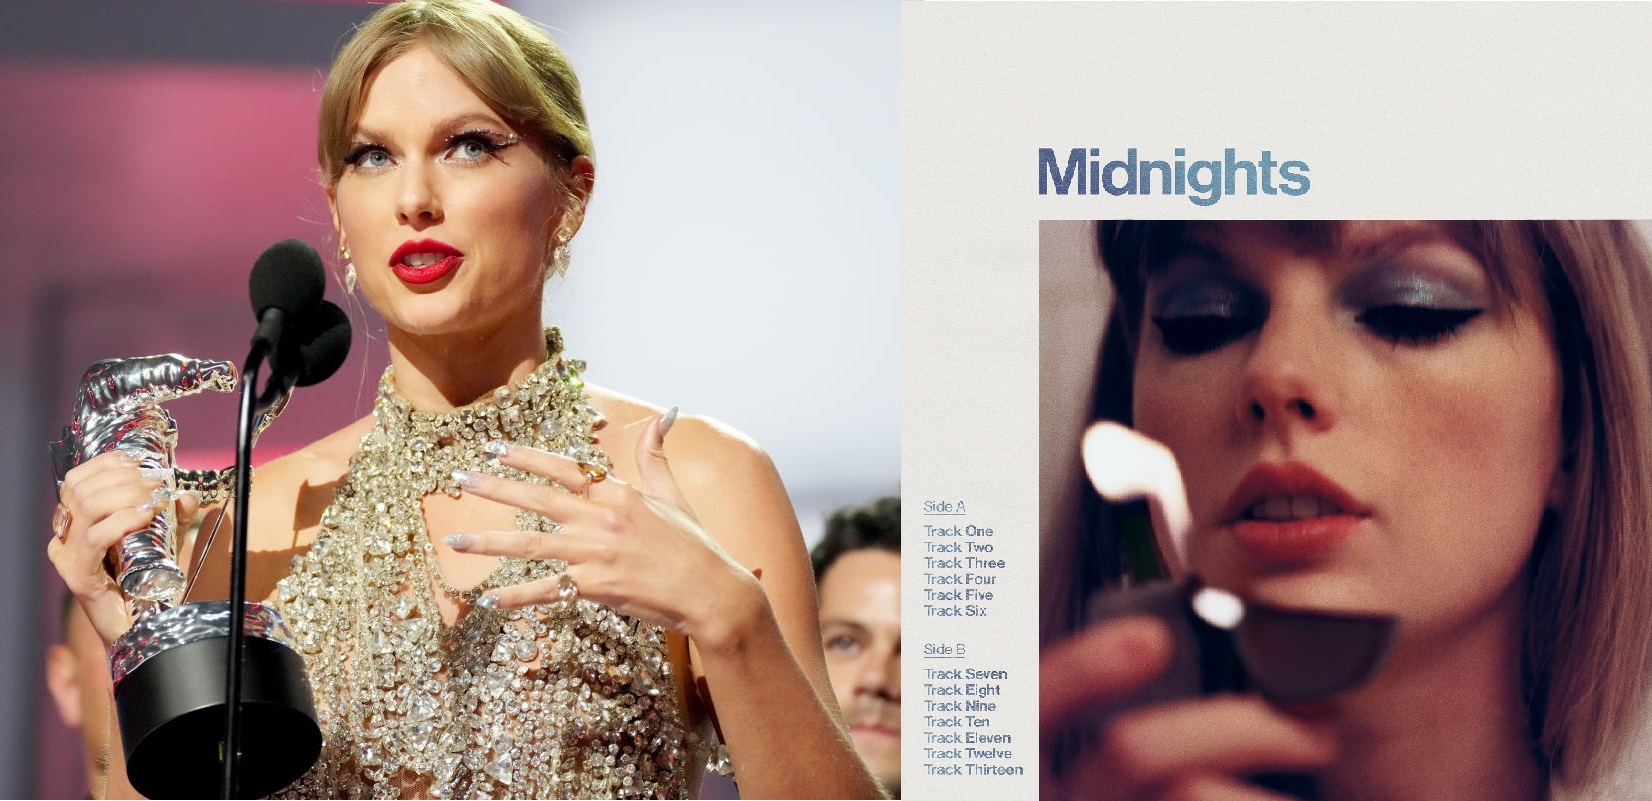 Taylor Swift announced her new album at the VMAs